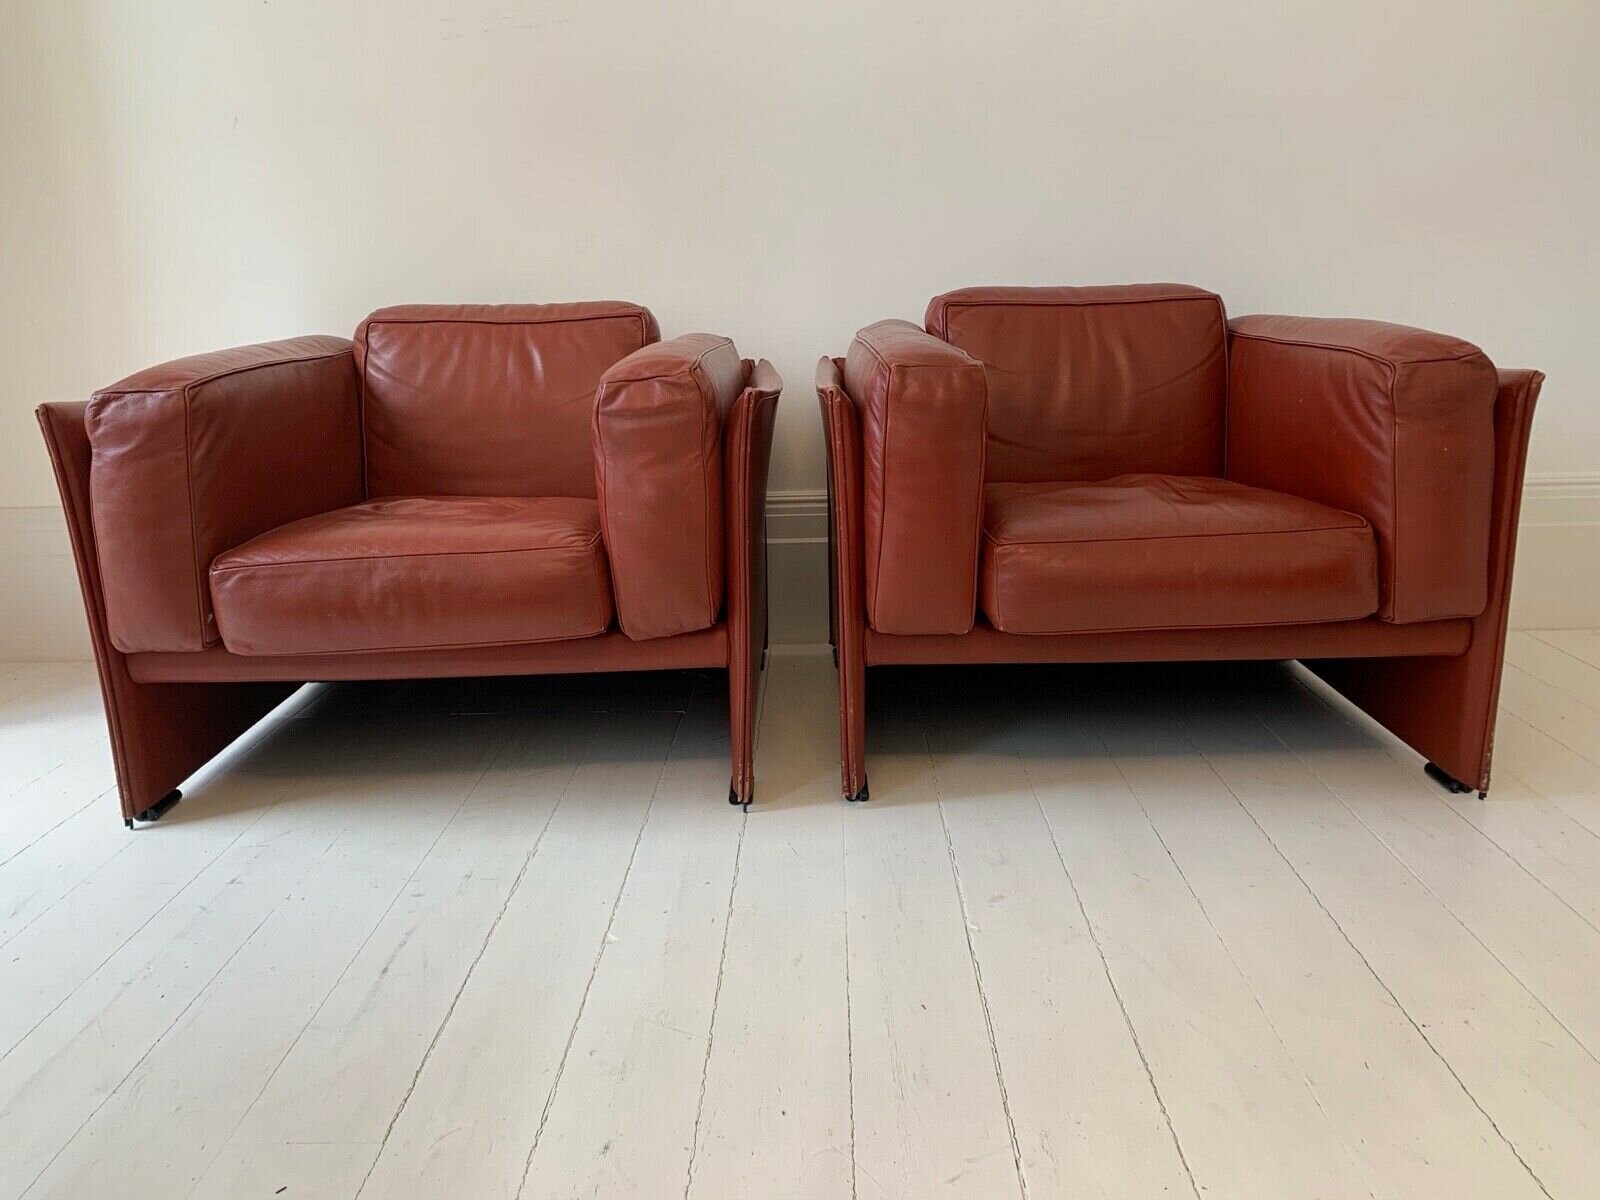 Cassina leather armchairs designed by Mario Bellini £5,500.00